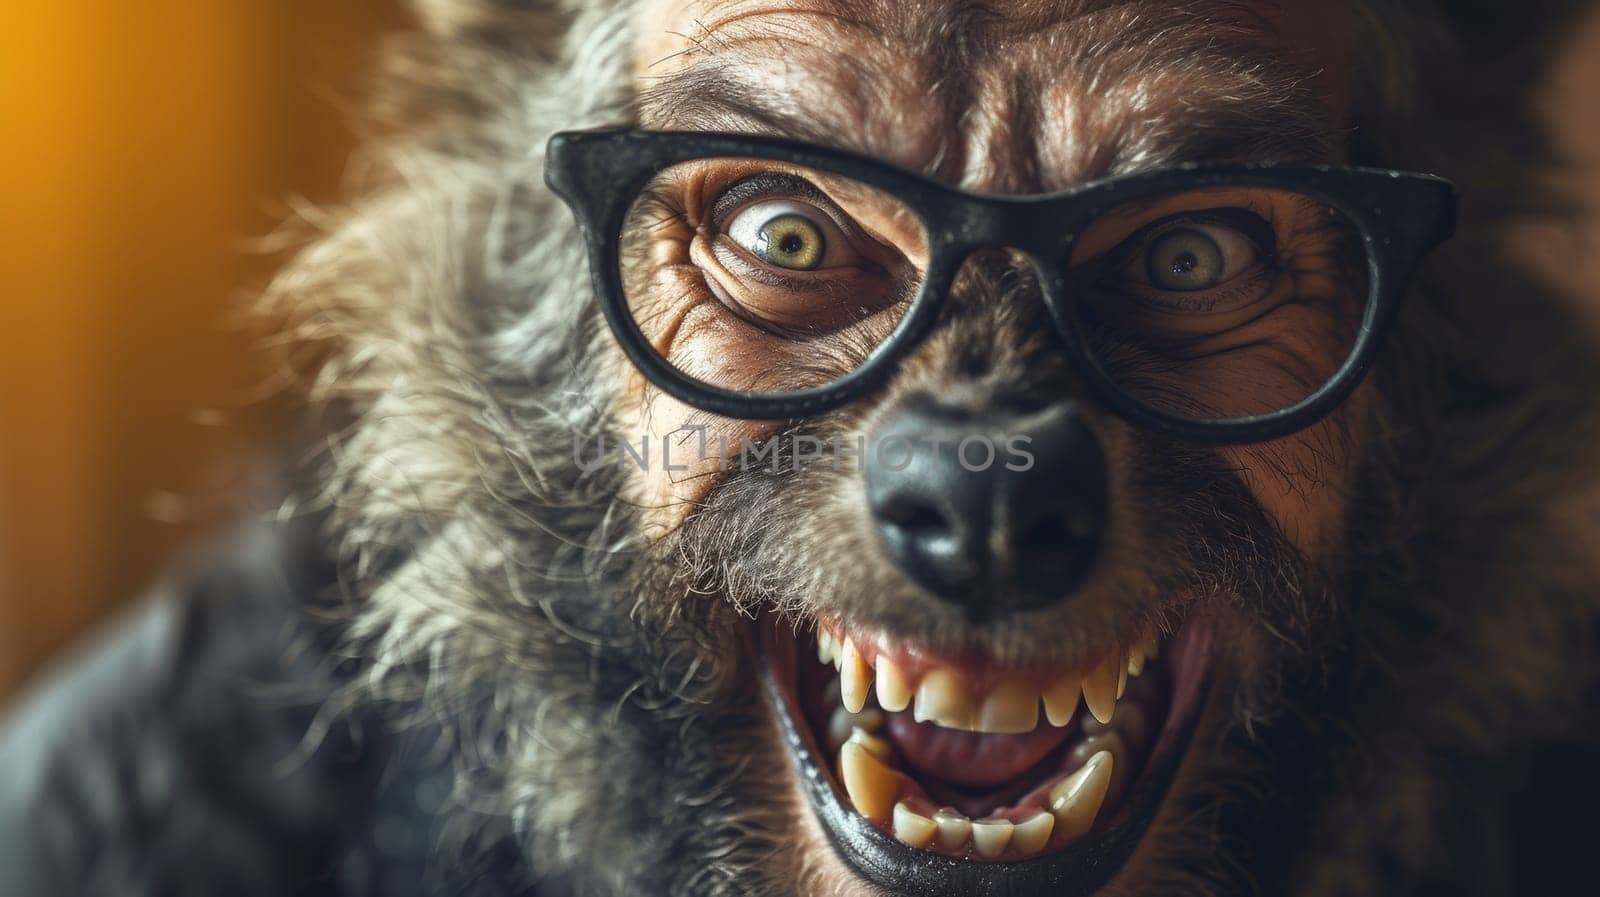 A close up of a man wearing glasses and an animal like face